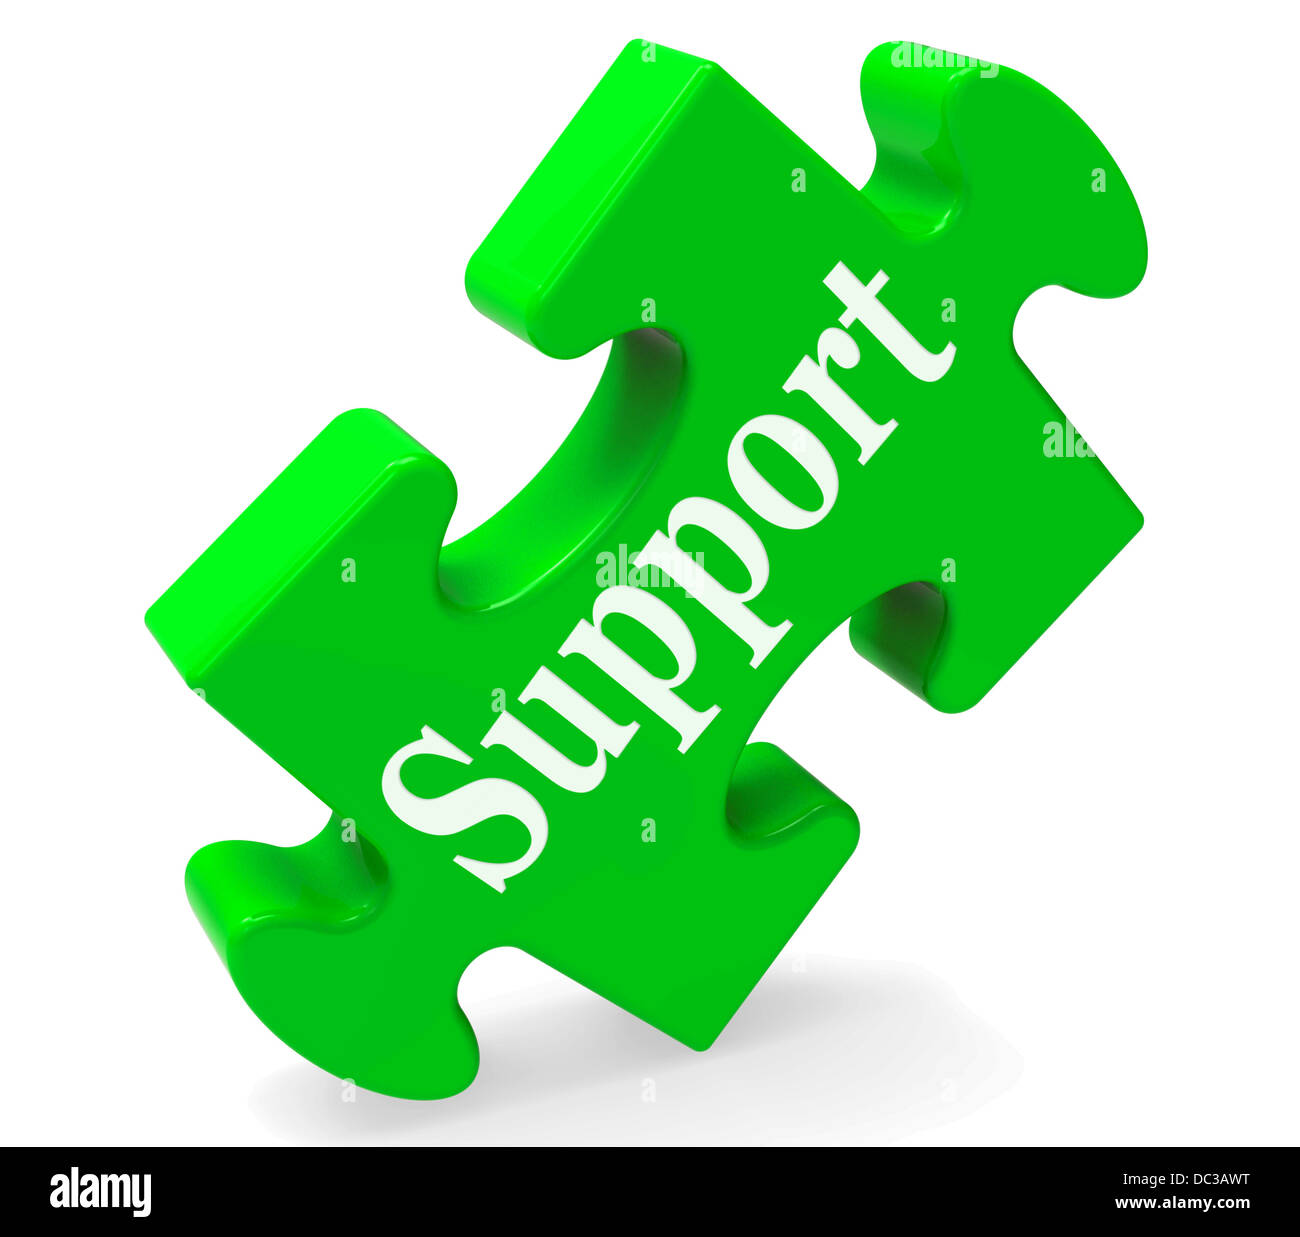 Support Shows Help Advice And Assistance Stock Photo